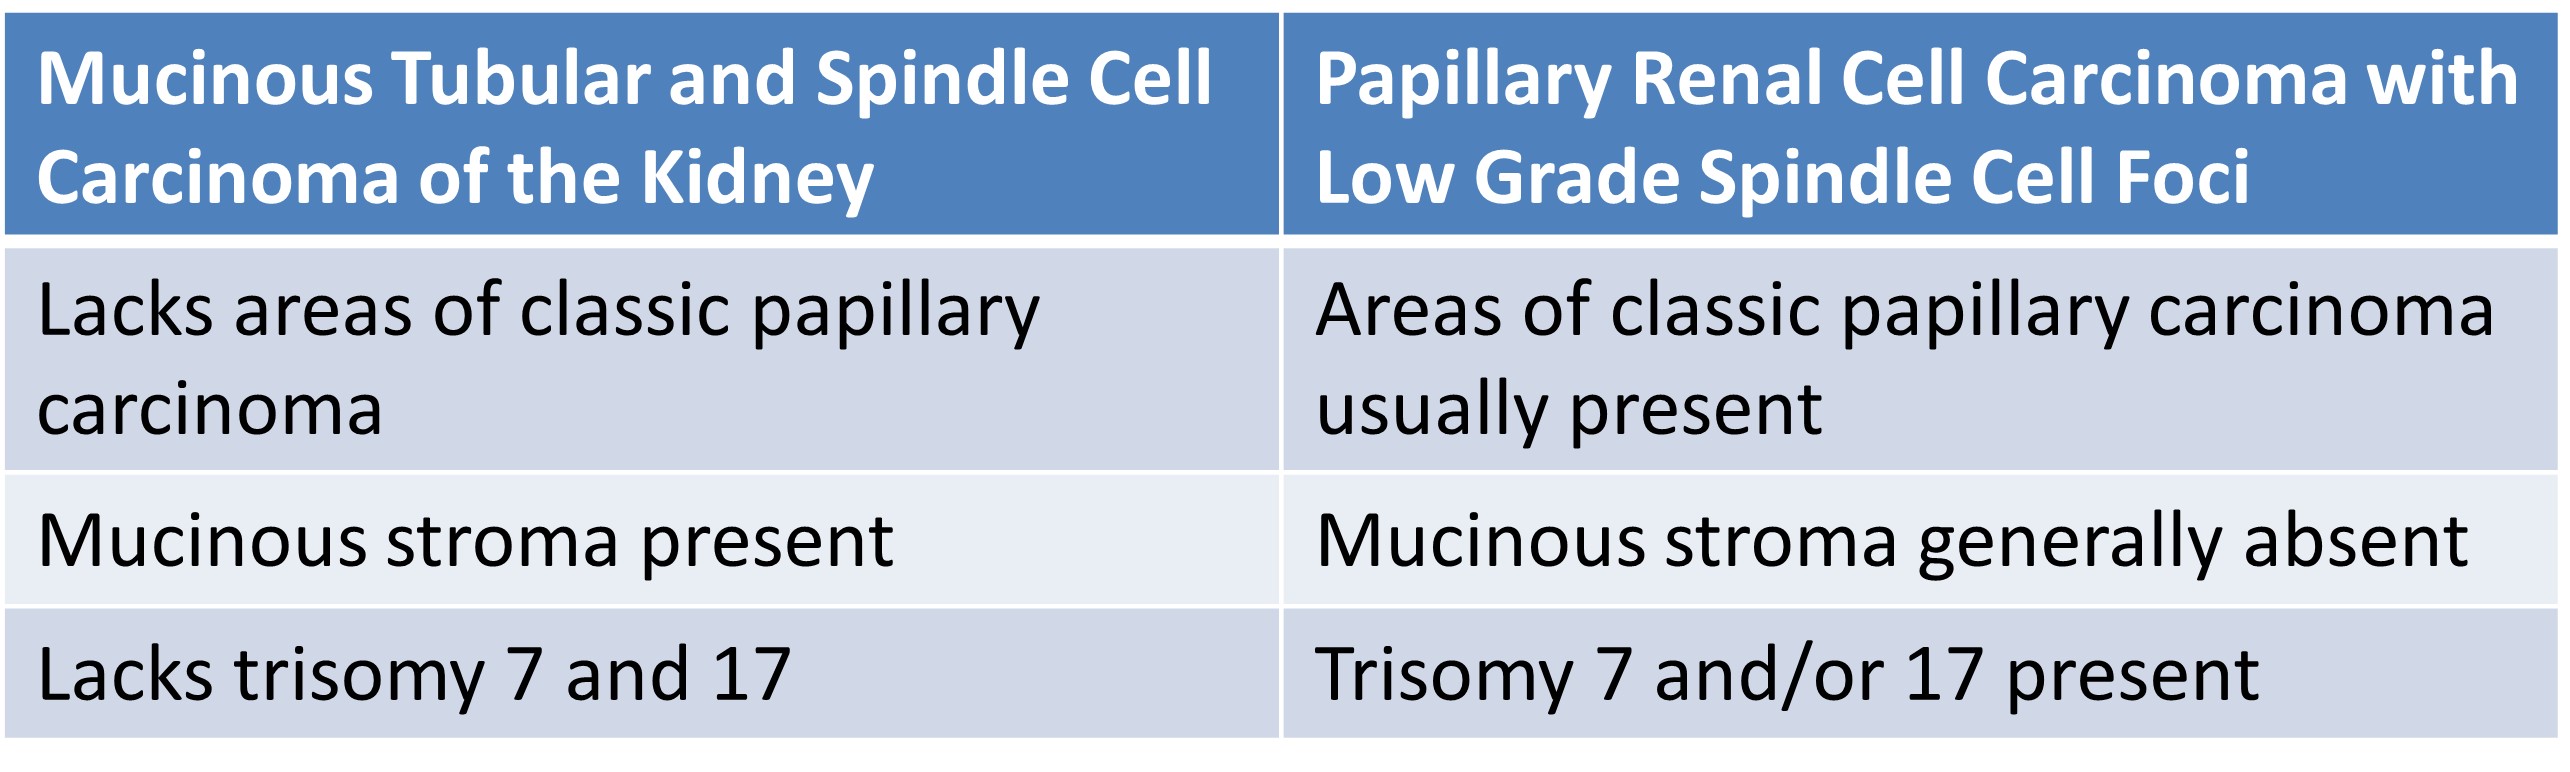 Table depicting Mucinous tubular and spindle cell carcinomas